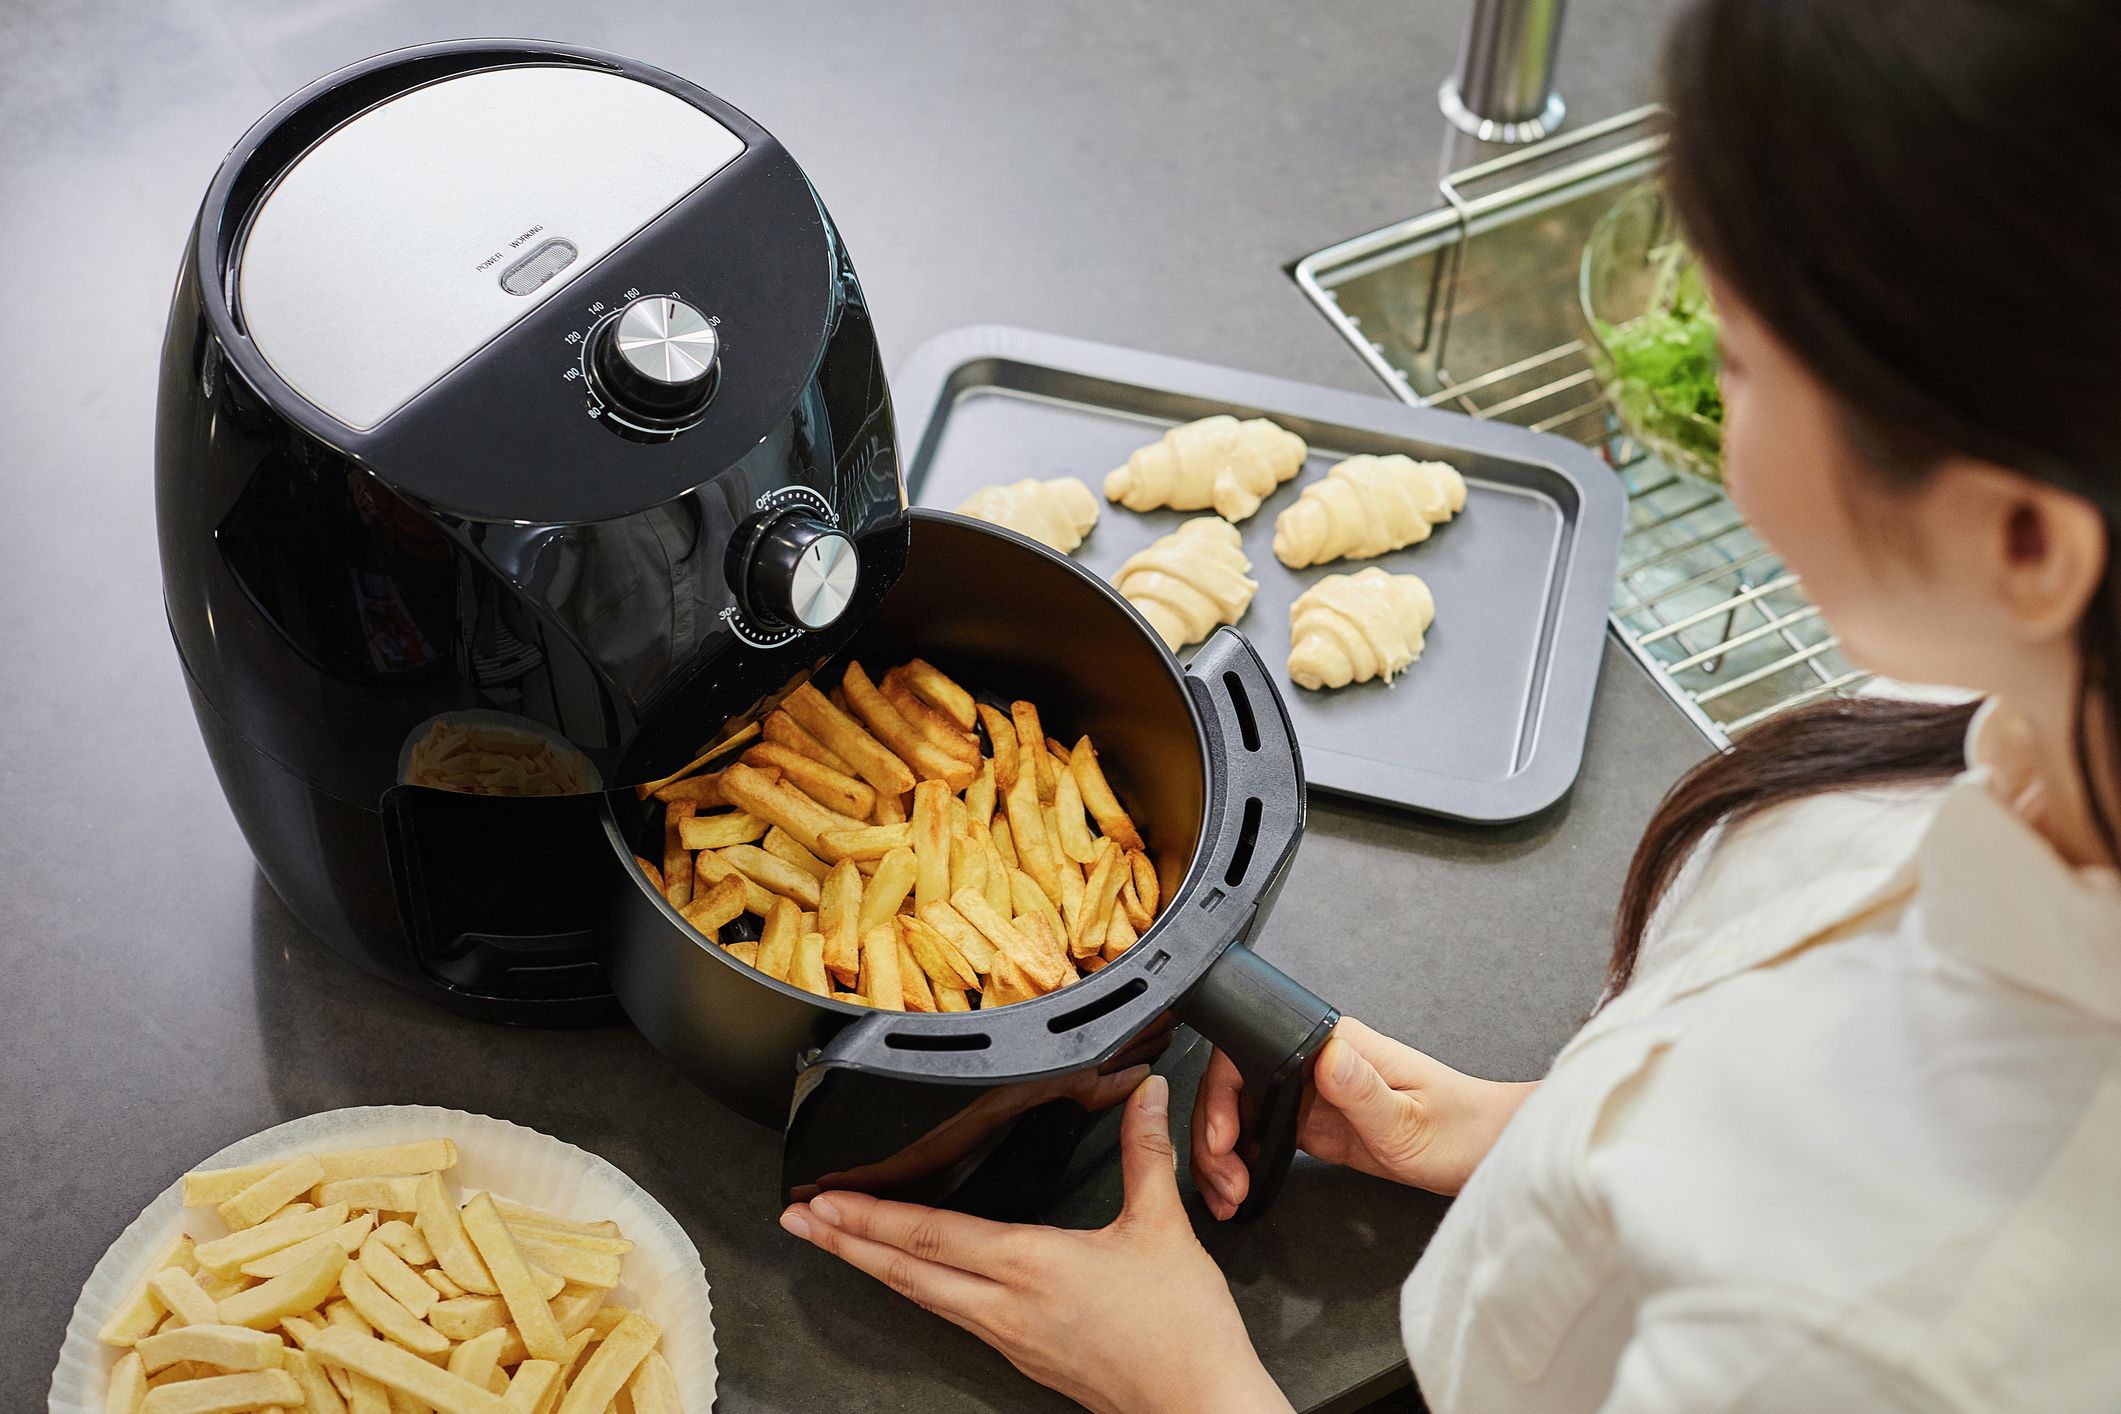 Air Fryer Safety Tips Do's and Don't: Mistakes to Avoid